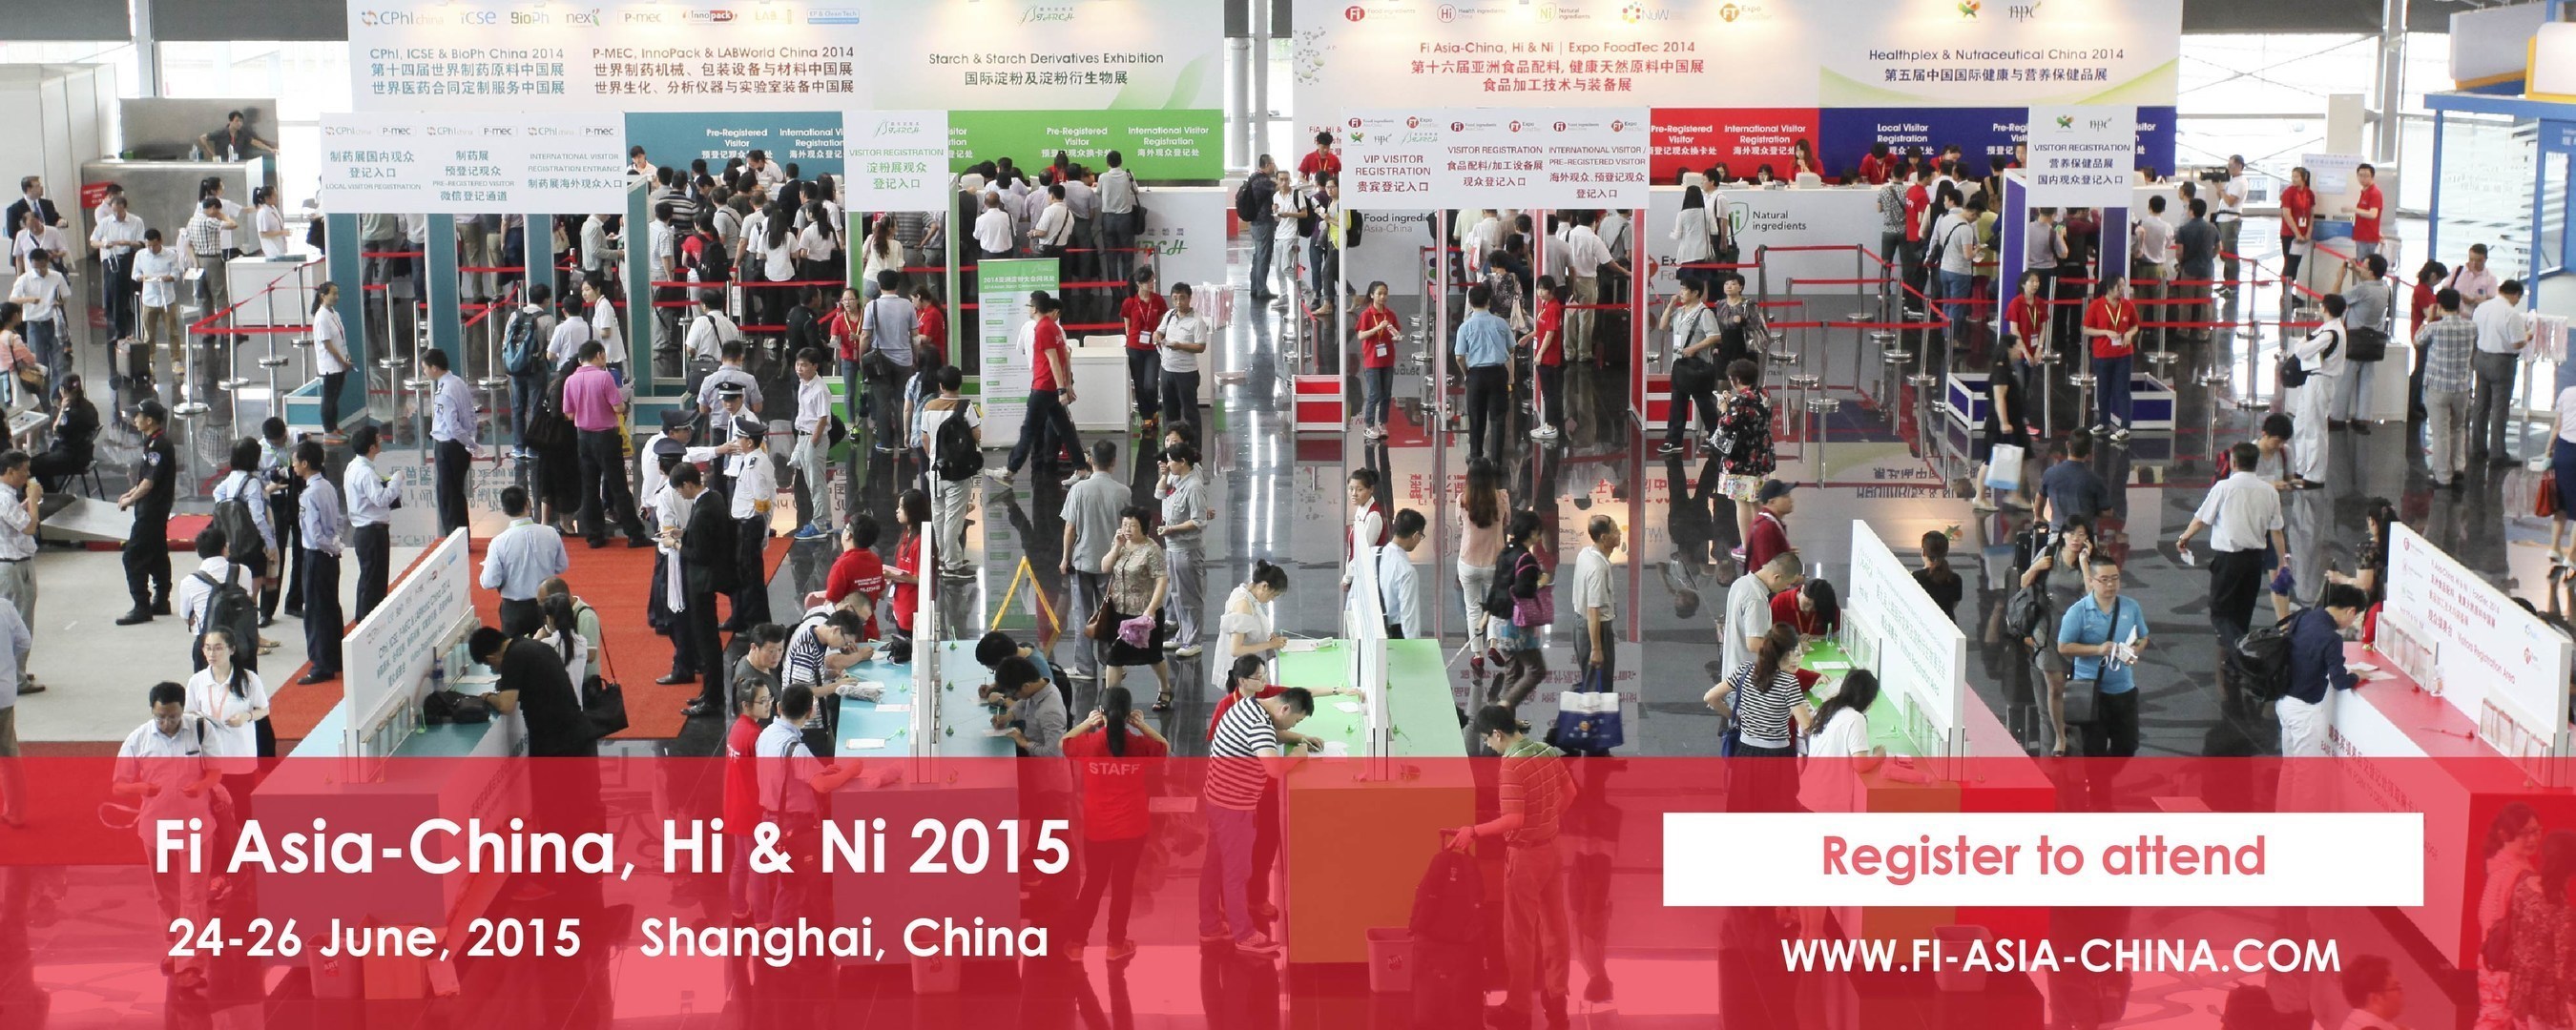 Welcome to visit Fi Asia-China 2015